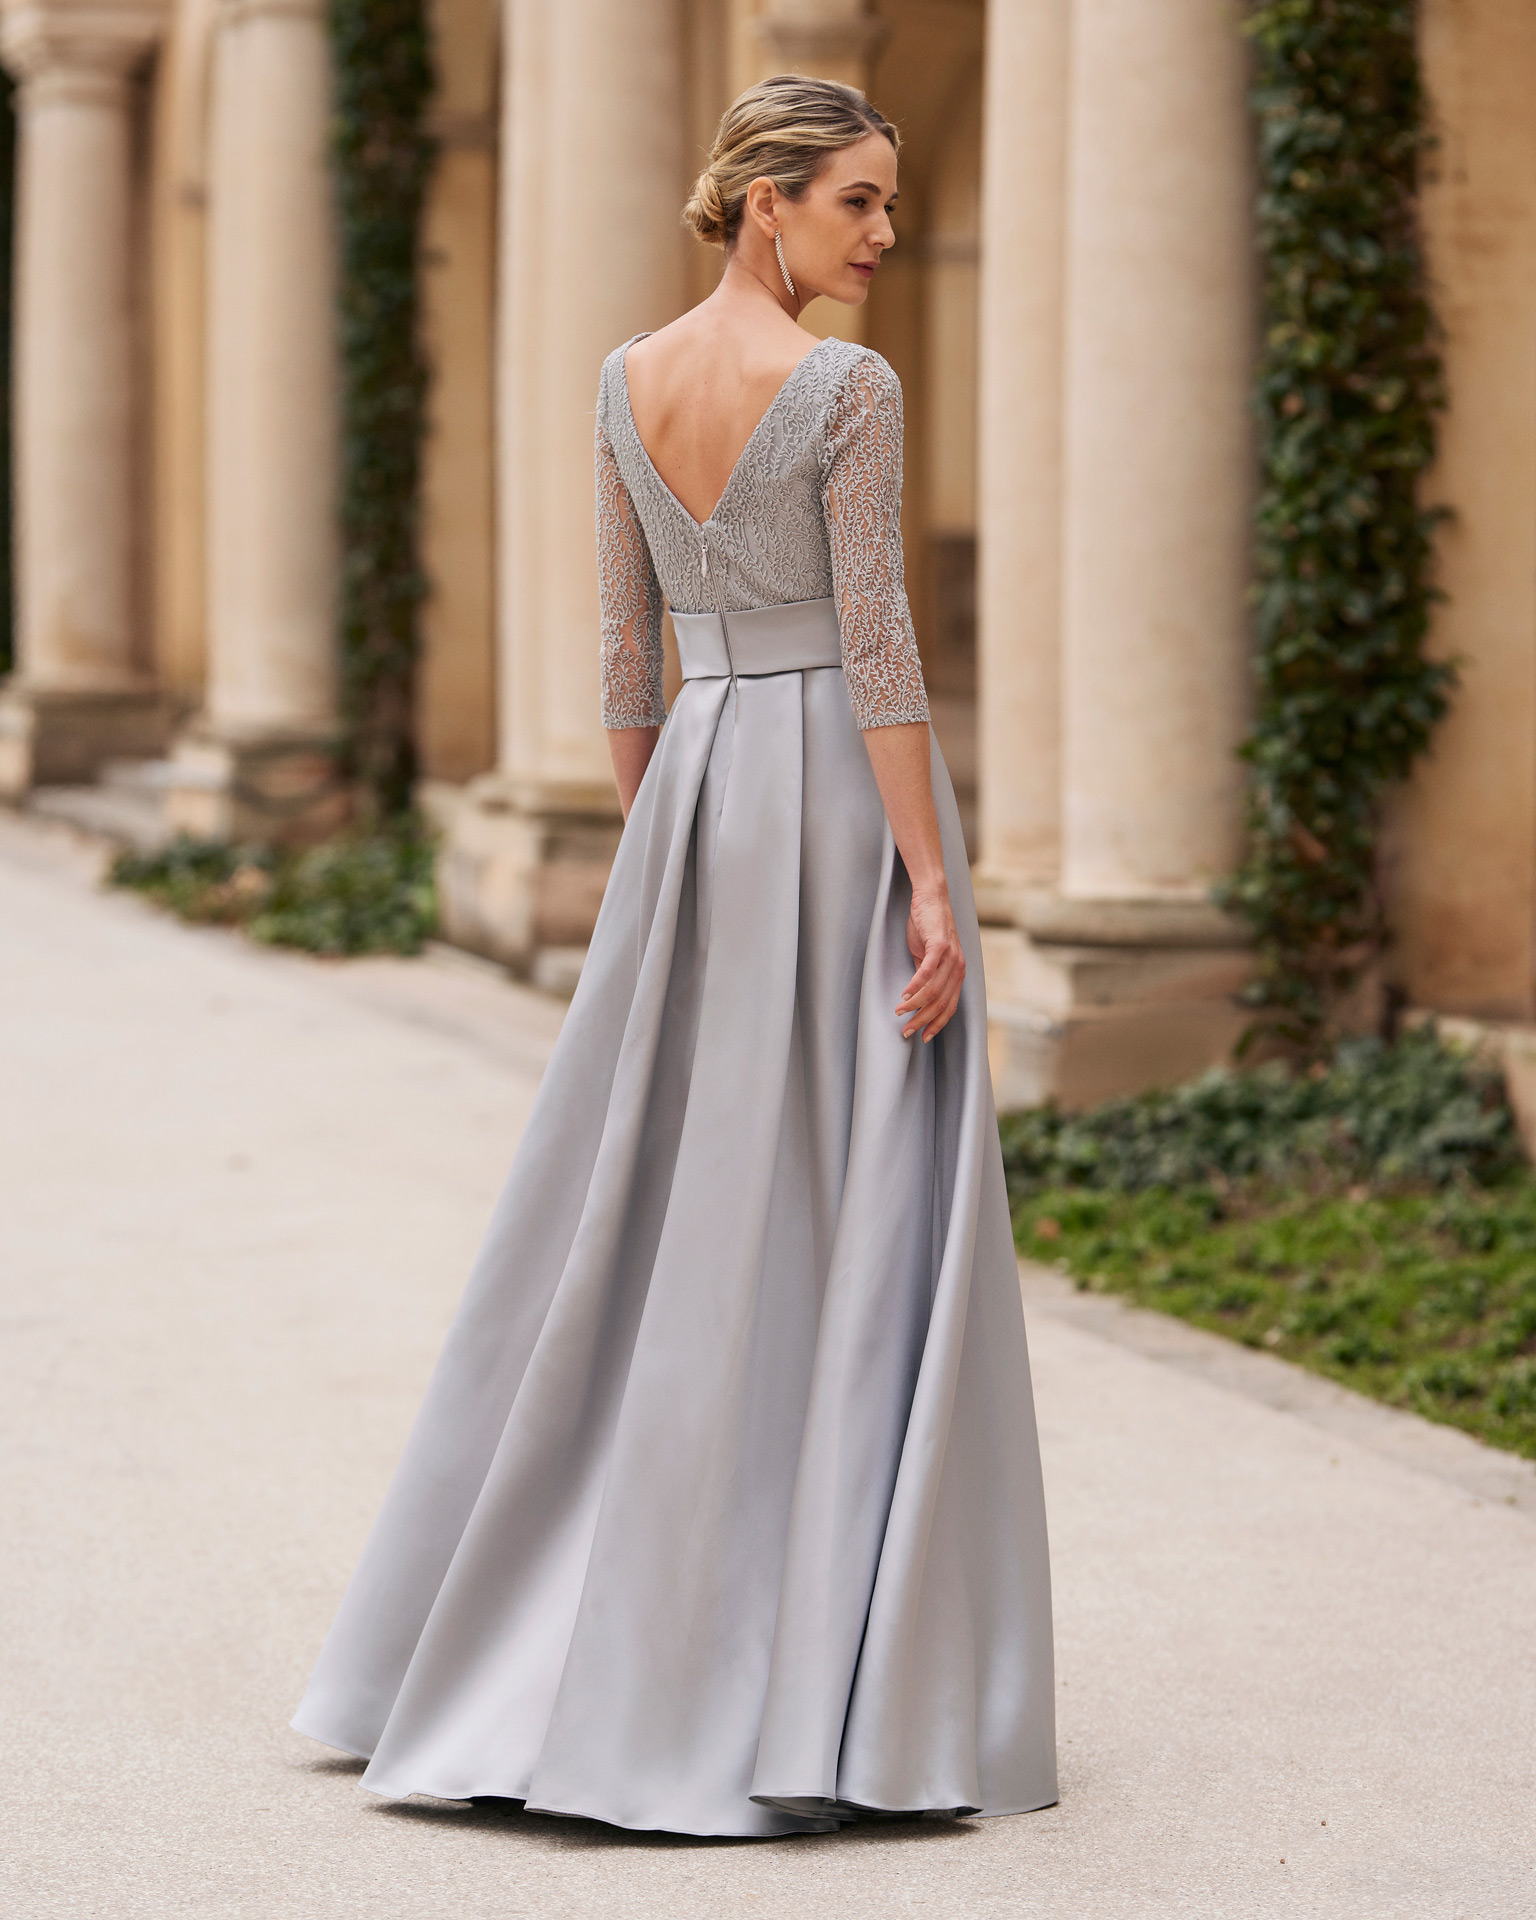 Elegant long evening dress. Crafted in mikado and lace. With bateau neckline, three-quarter sleeves and a skirt with front slit. Couture Club look for parties and celebrations. MARFIL_BARCELONA.